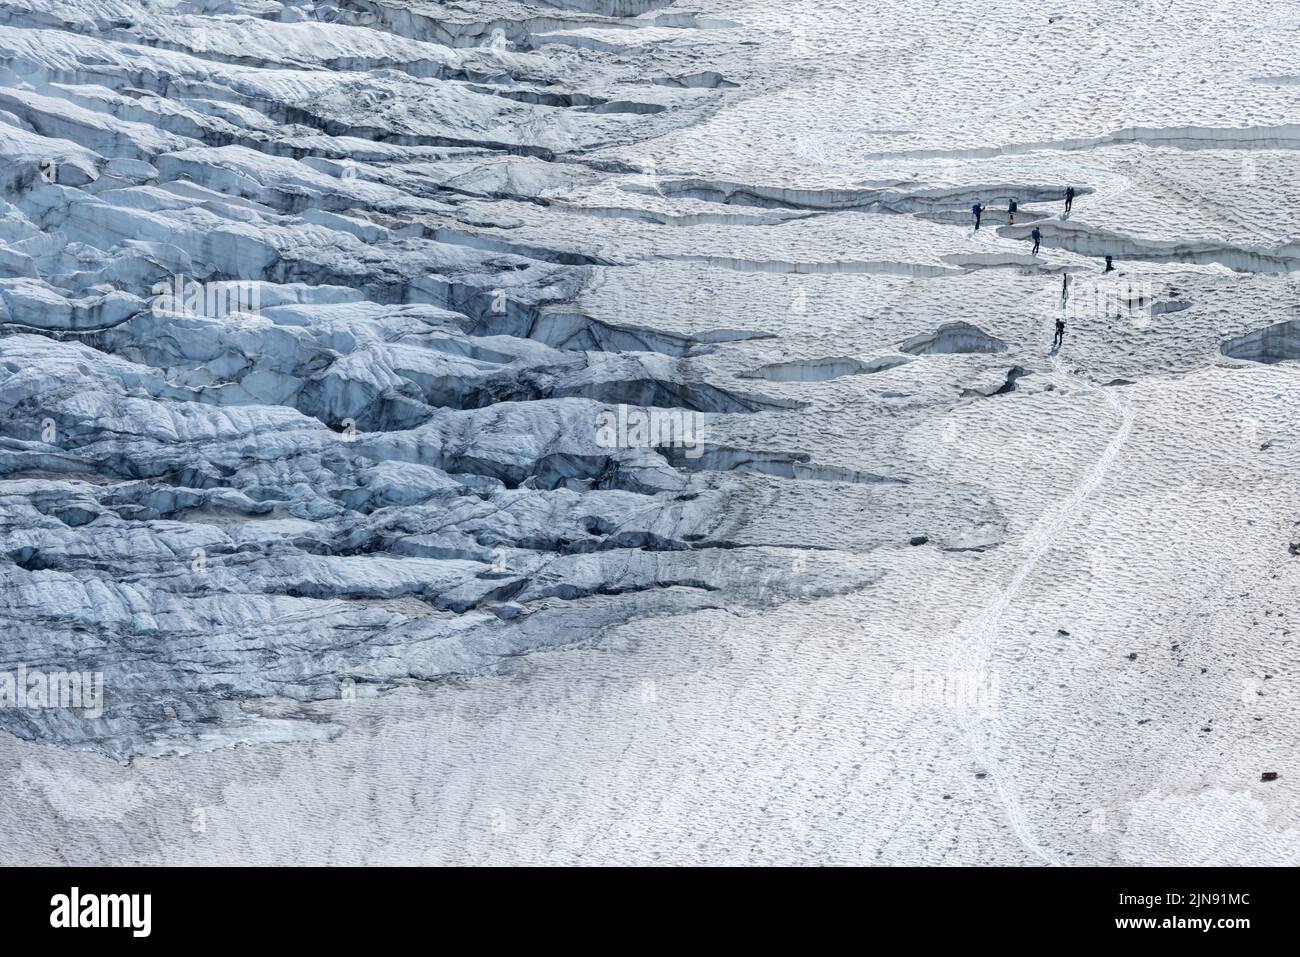 roped team of mountaineers on the ice of Steingletscher in the Bernese Alps Stock Photo